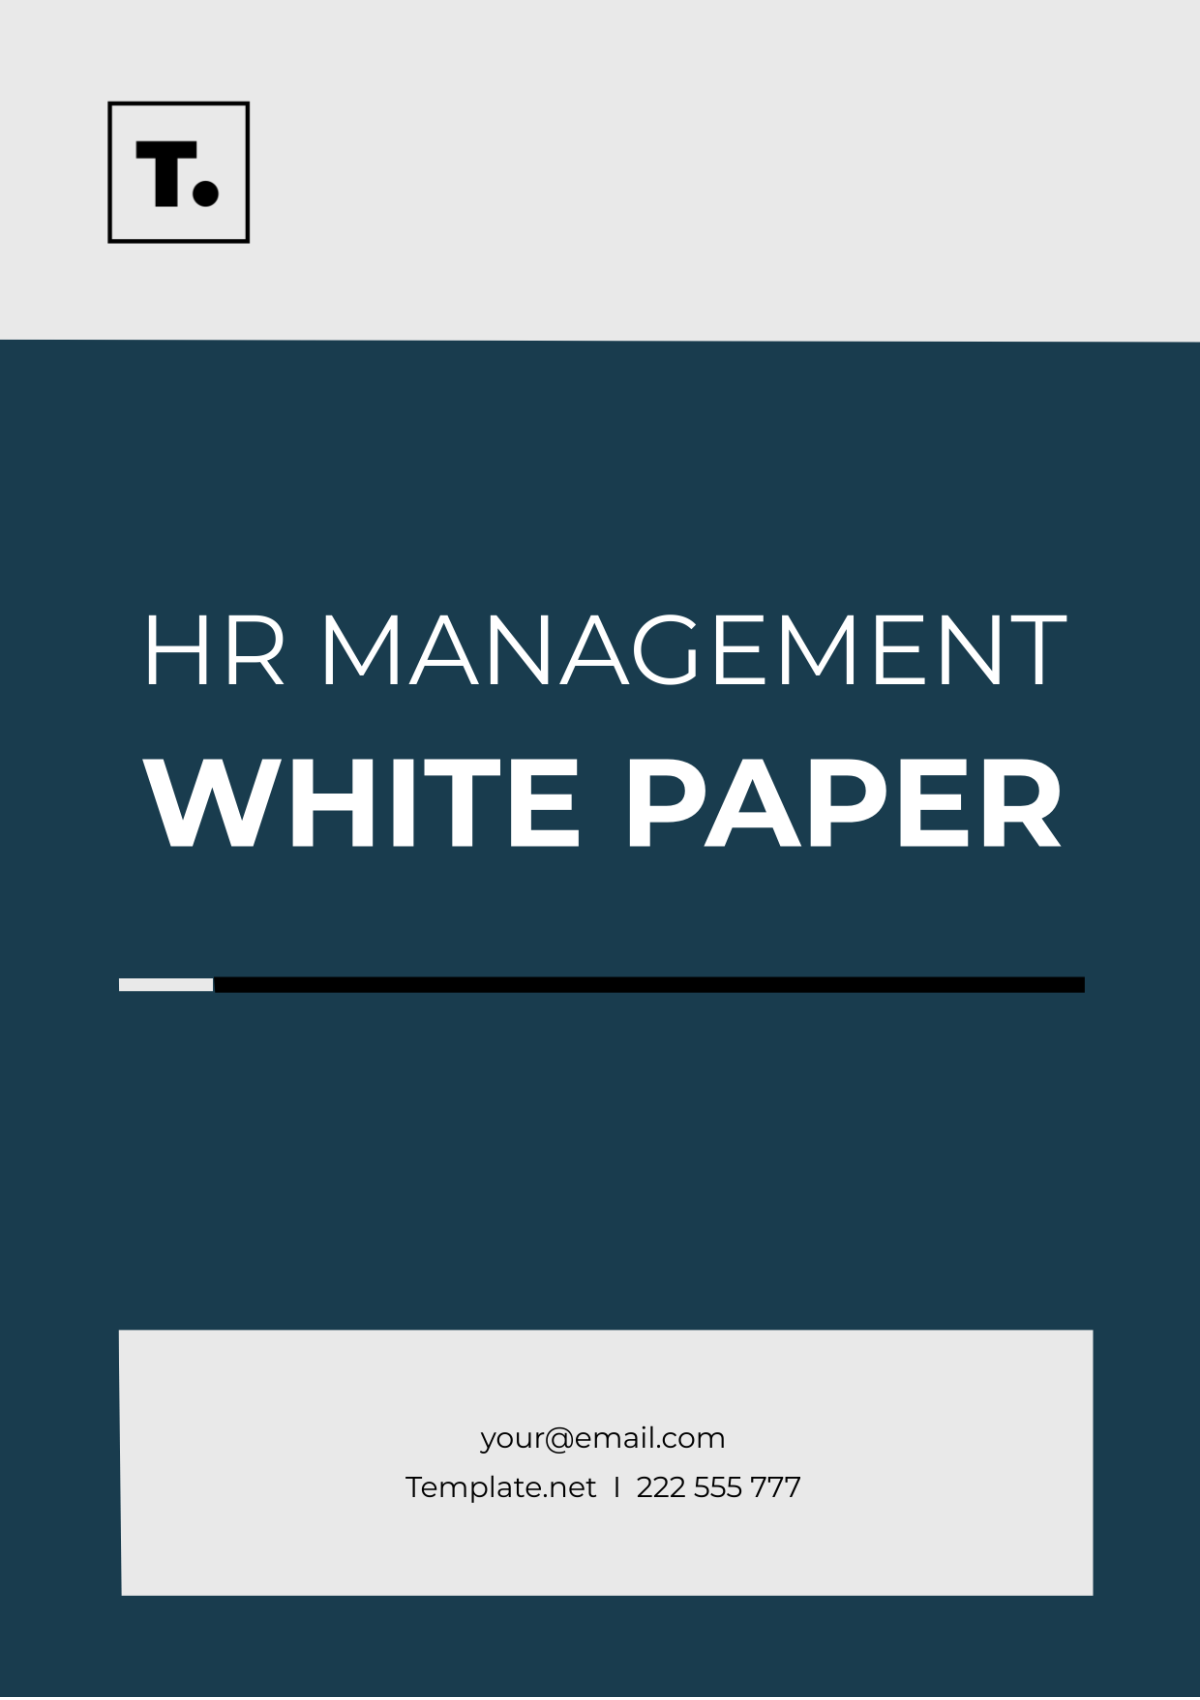 HR Management White Paper Template